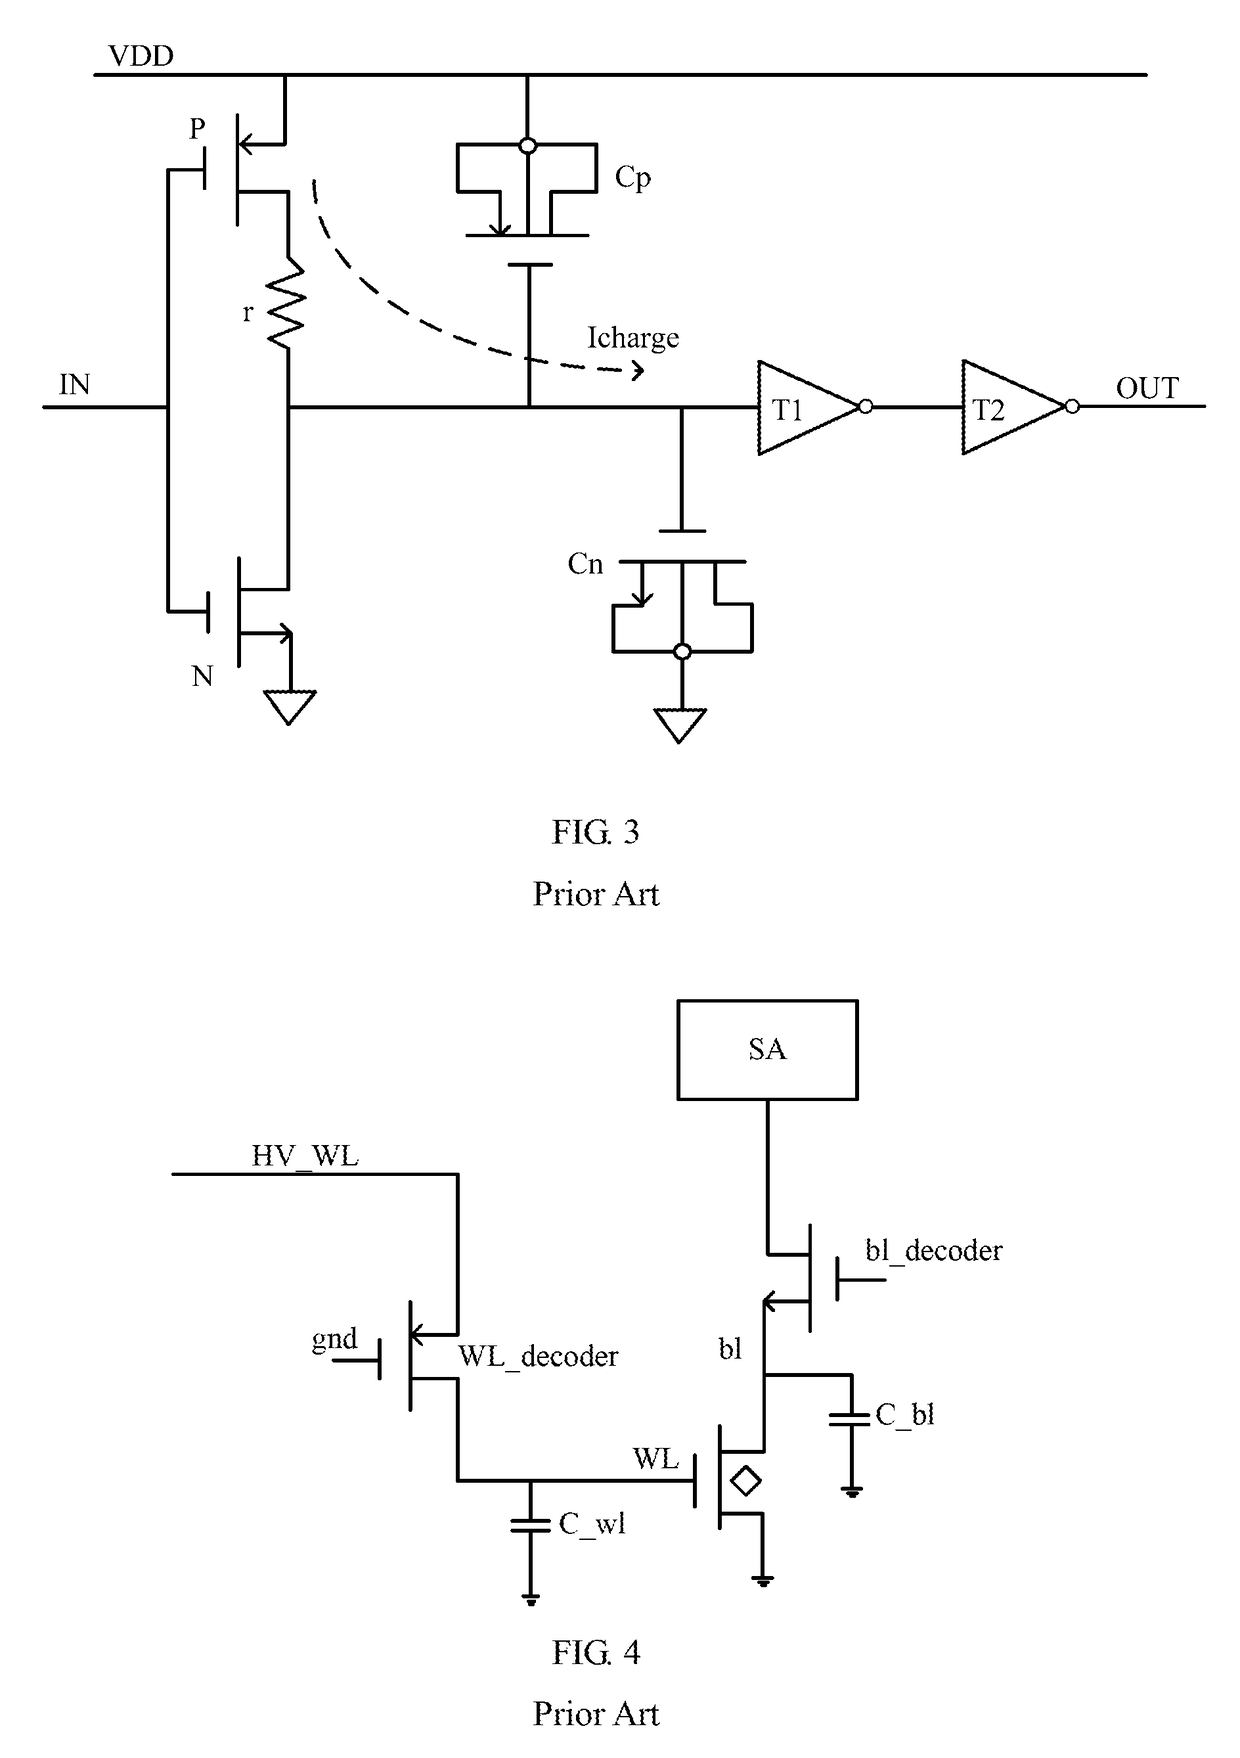 Circuits for control of time for read operation, using a current mirror circuit to mirror a reference current into the dummy device and generates time control signals based on the mirrored current